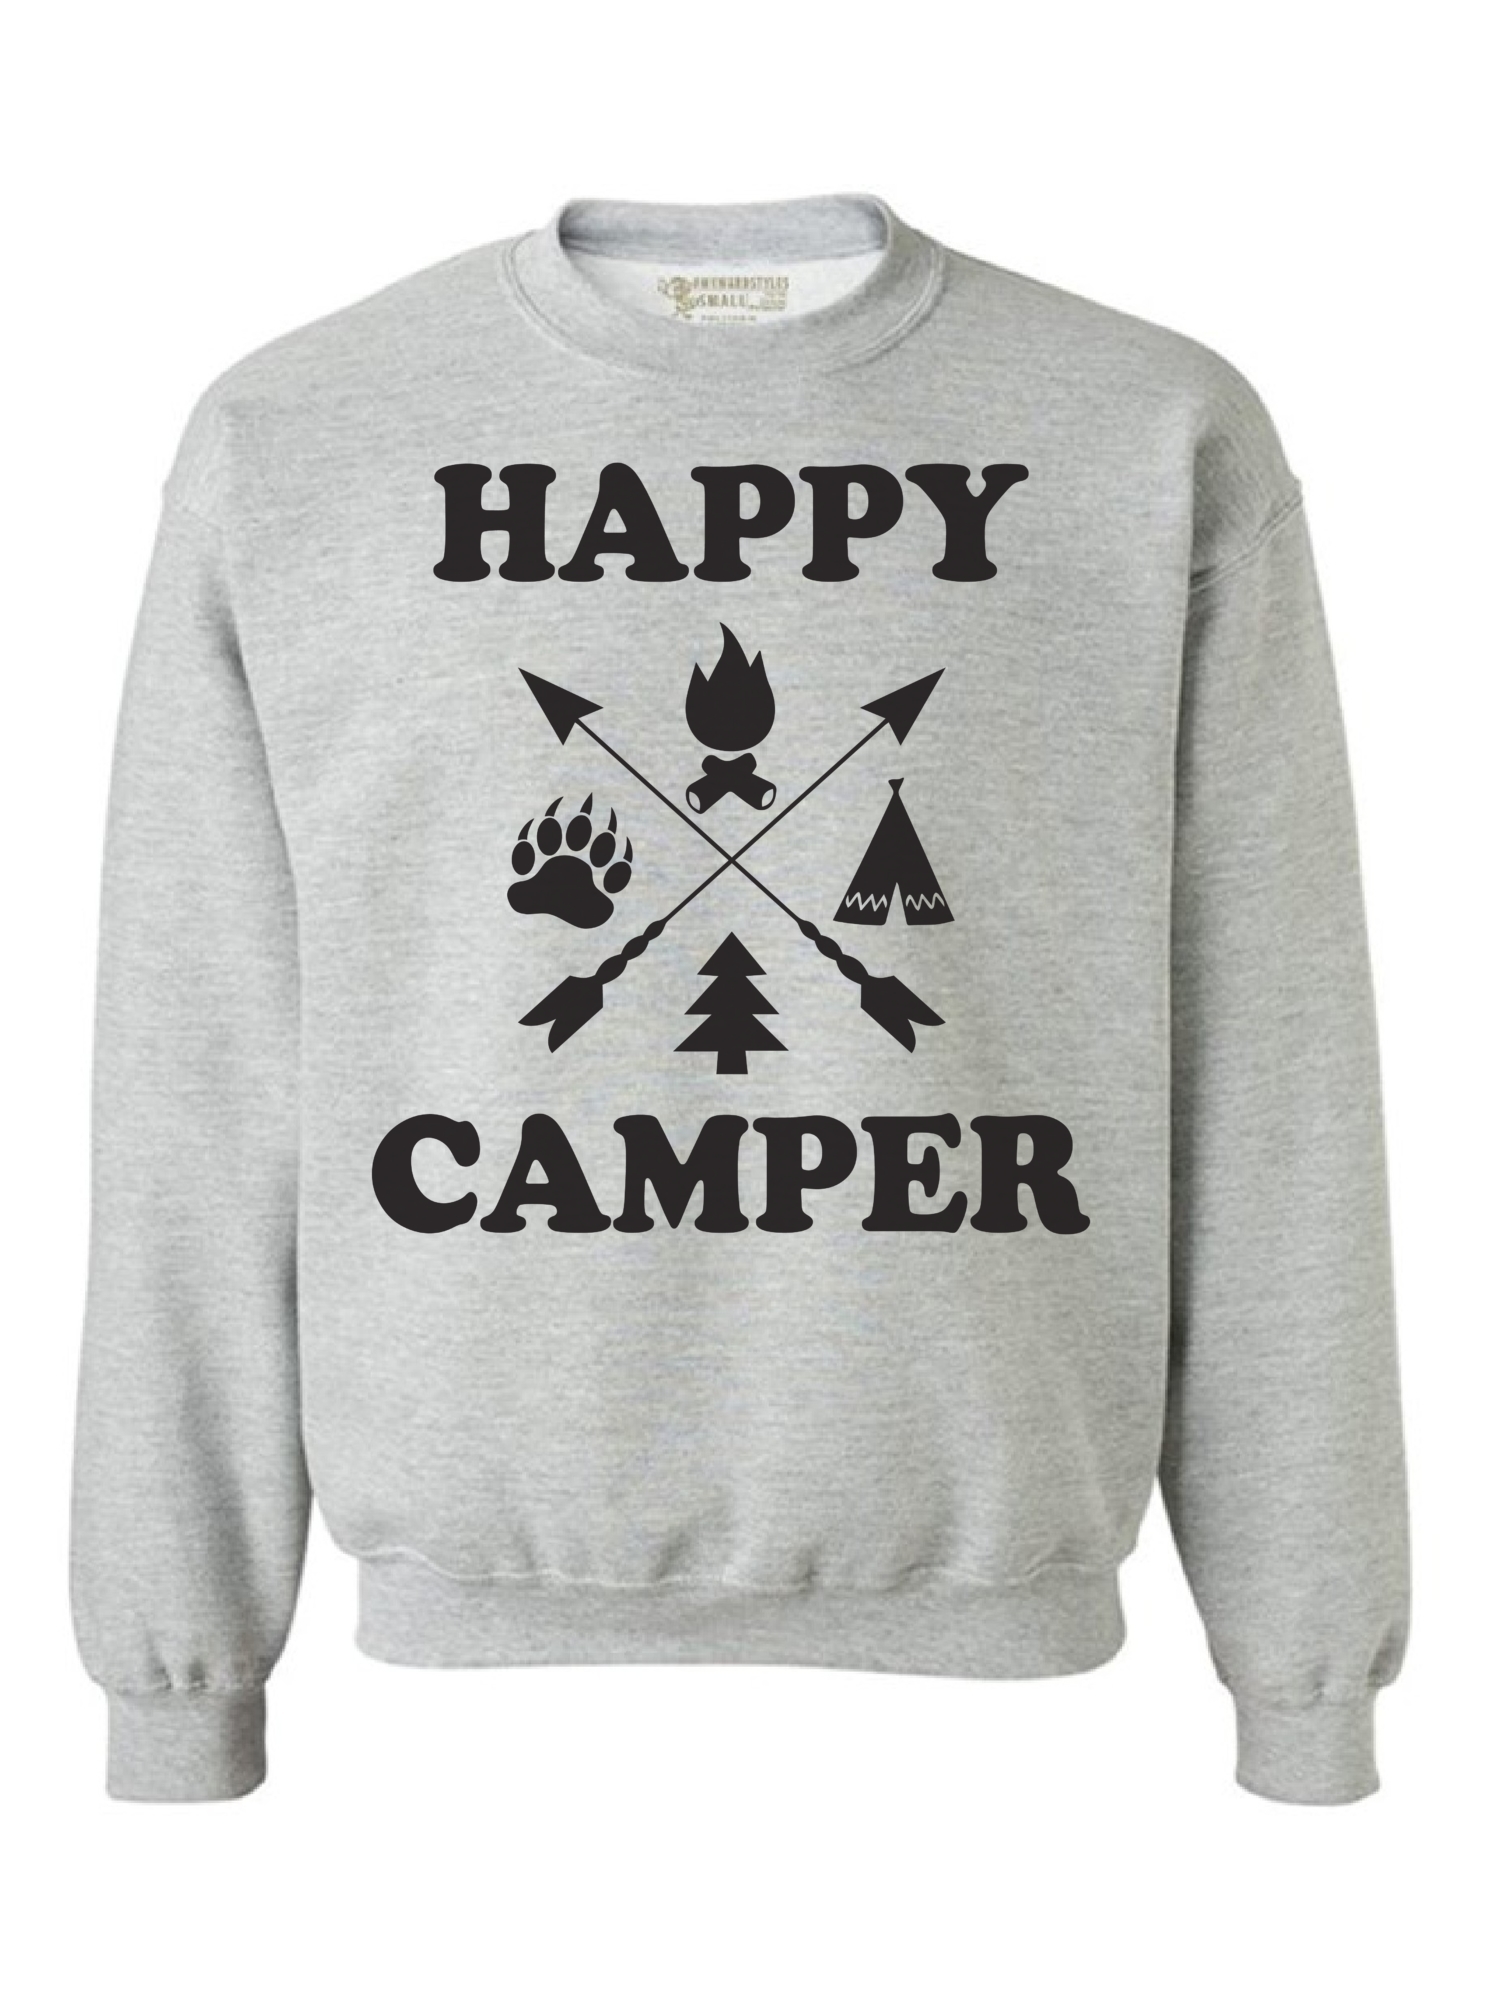 Awkward Styles Black Crewneck for Camper Happy Camper Unisex Crewneck Camper Sweater for Men Happy Camper Crewneck for Women Camping Clothes Happy Camper Crewneck Campers Gifts Sweater for Camper - image 1 of 5